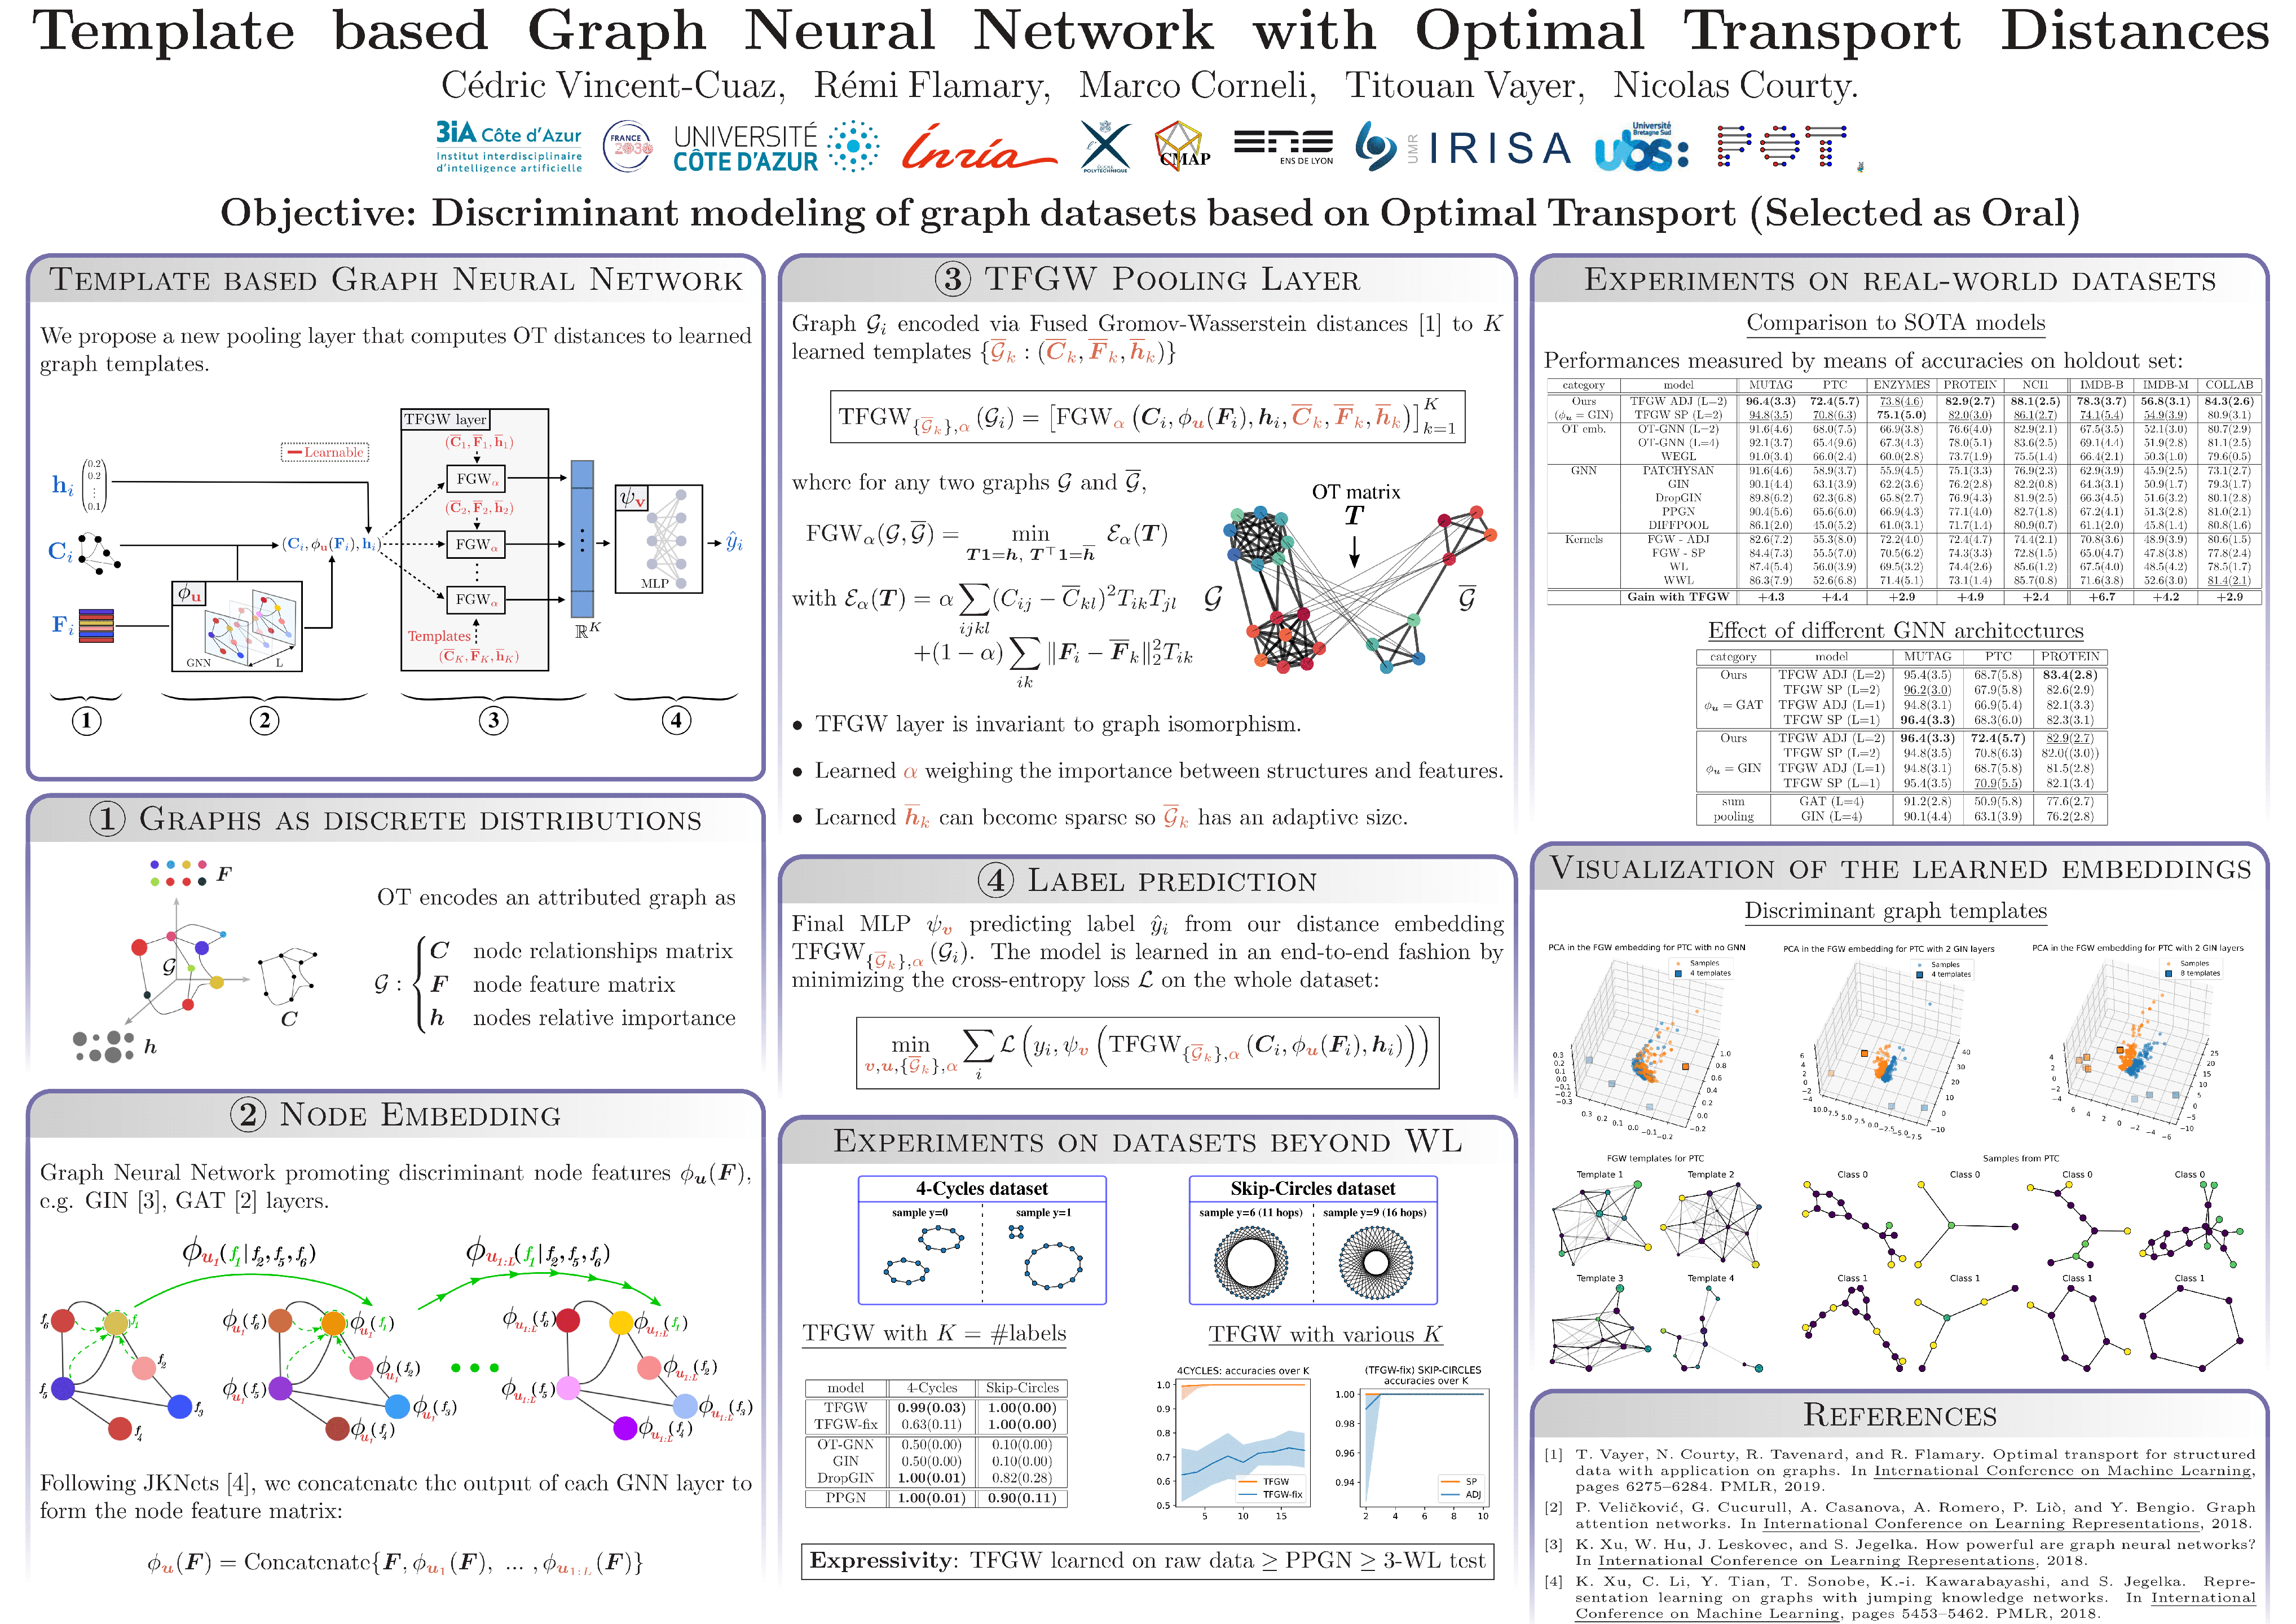 NeurIPS Poster Template based Graph Neural Network with Optimal